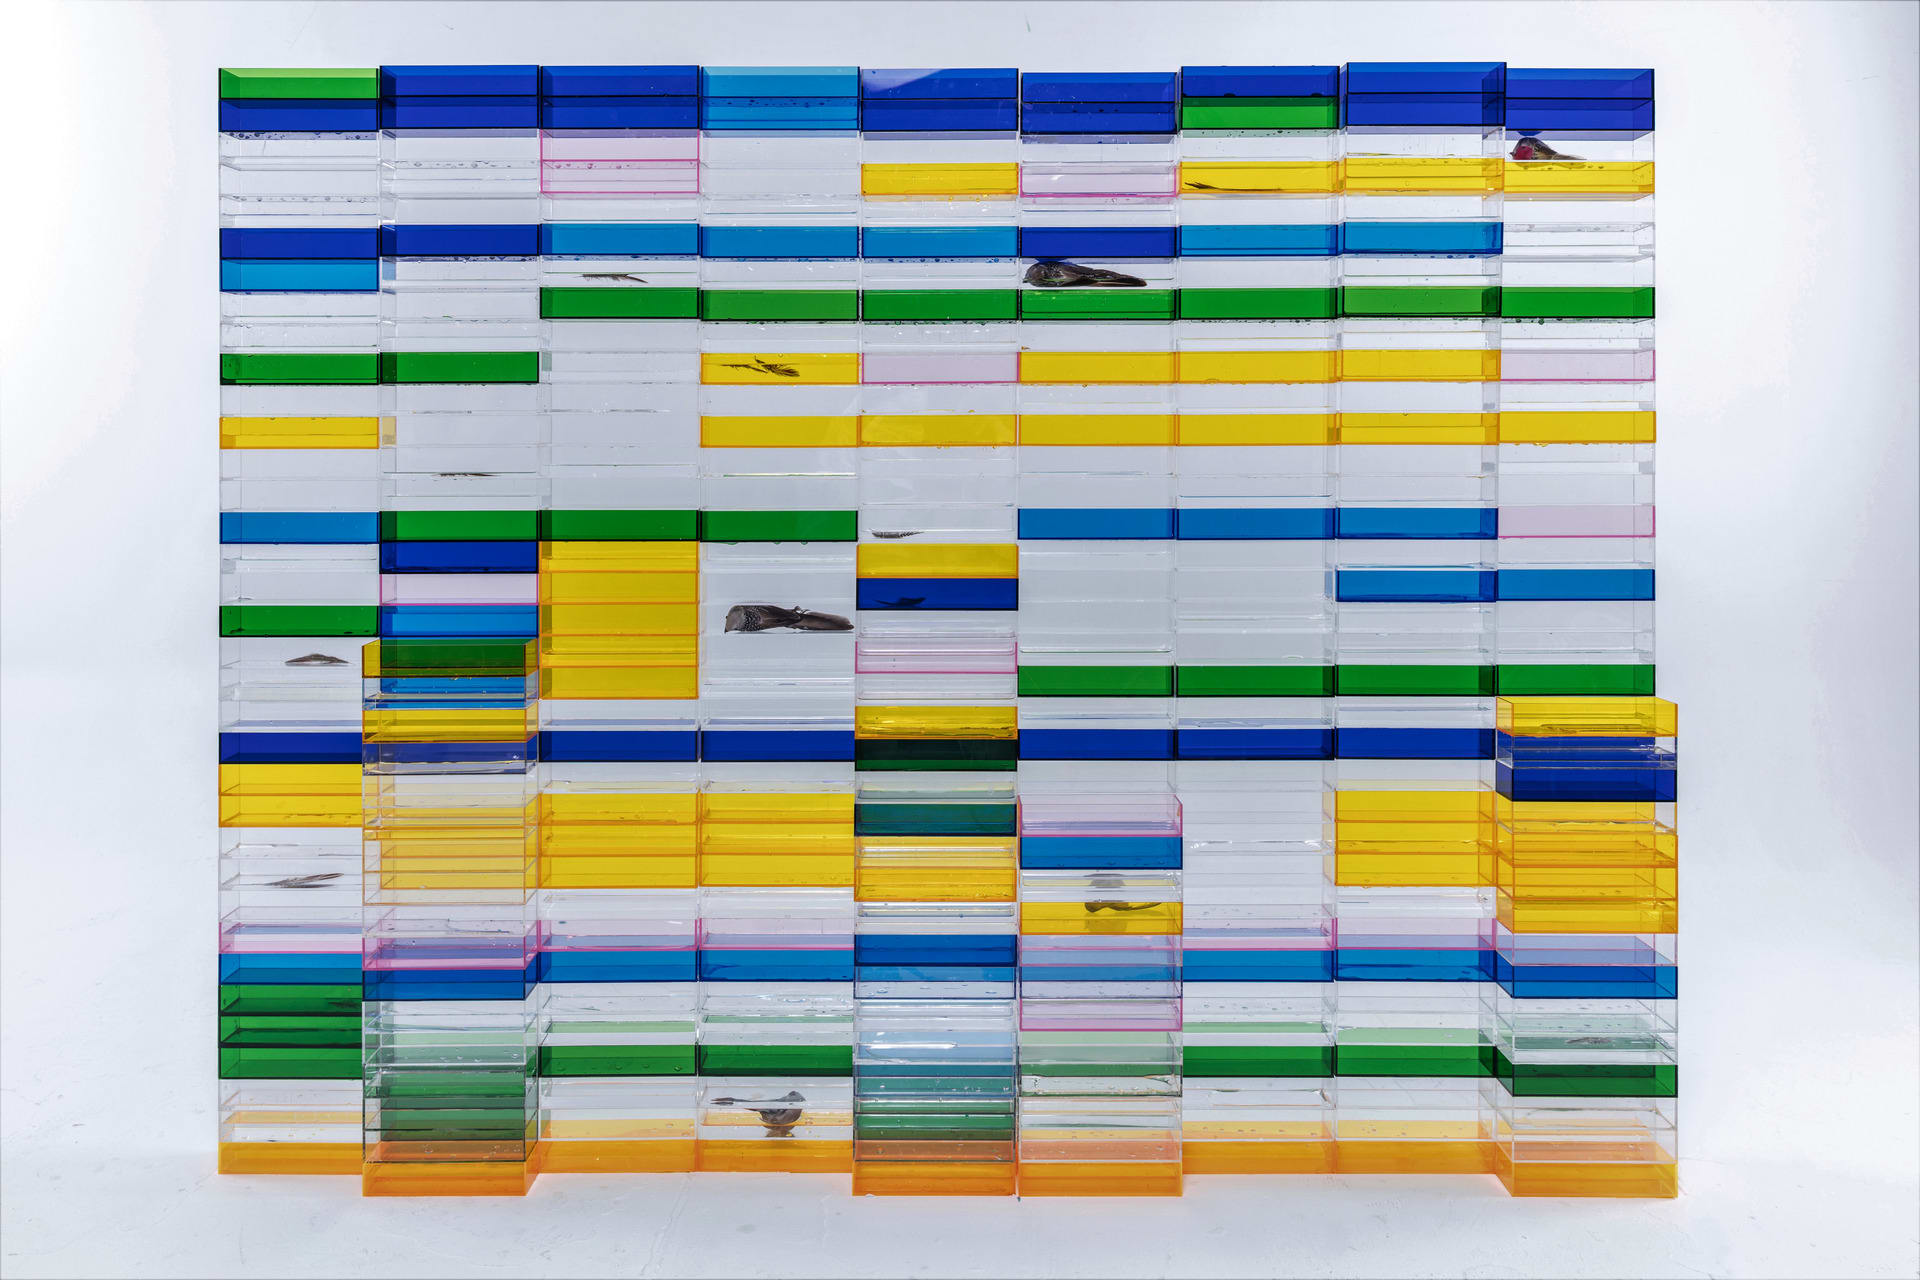 Wall of plexiglass boxes in multi-colored arrangement, in the form of an excel table. bodies of birds and feathers lie inside.